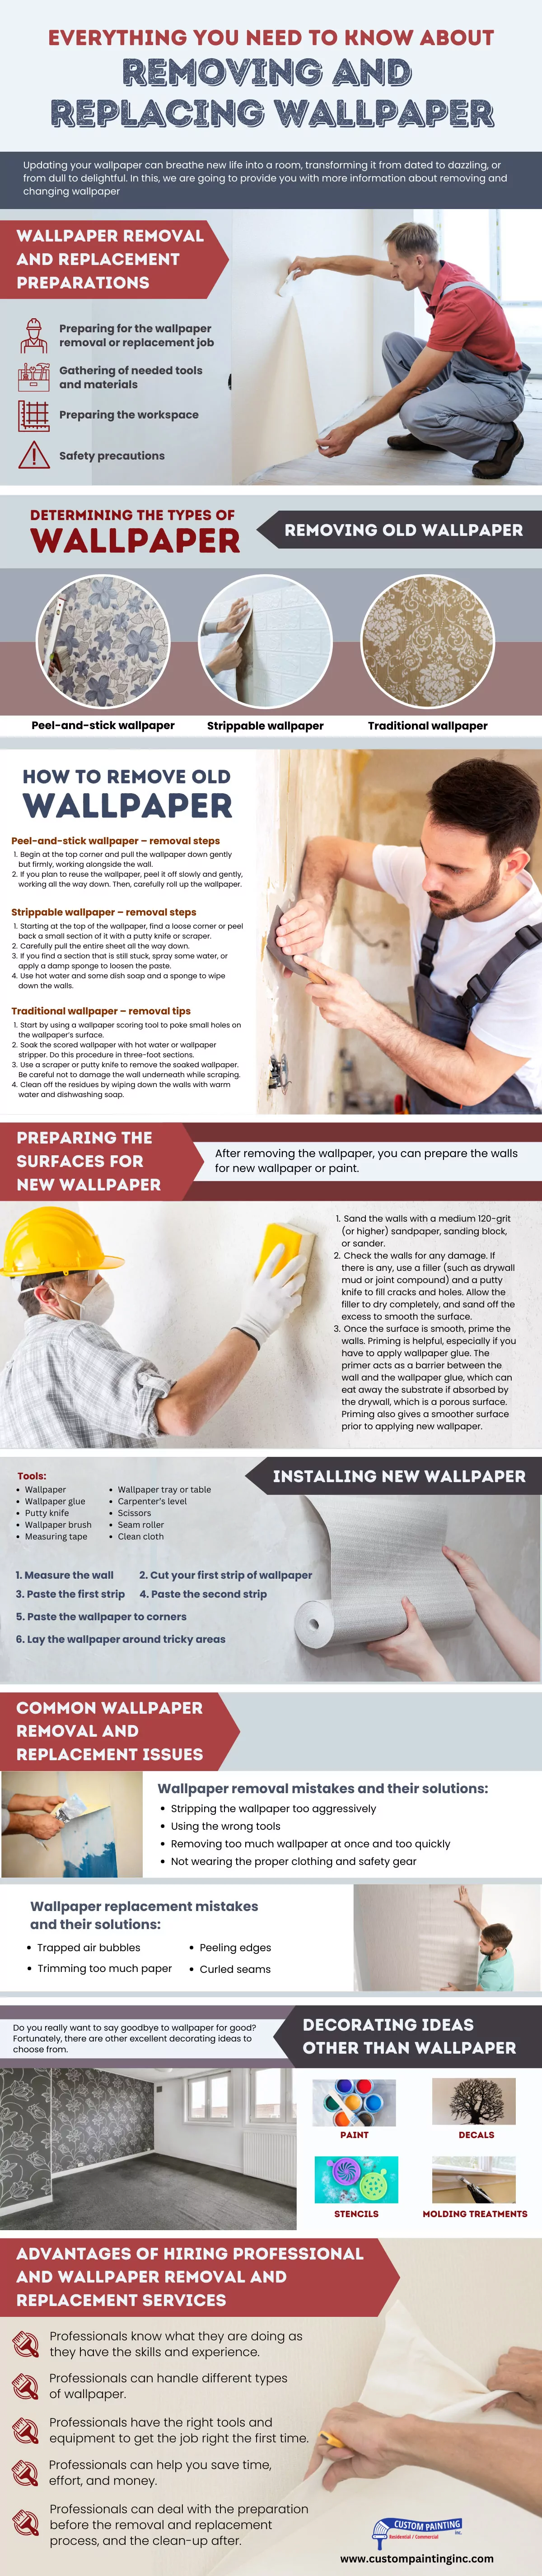 Everything You Need to Know about Removing and Replacing Wallpaper Infographic